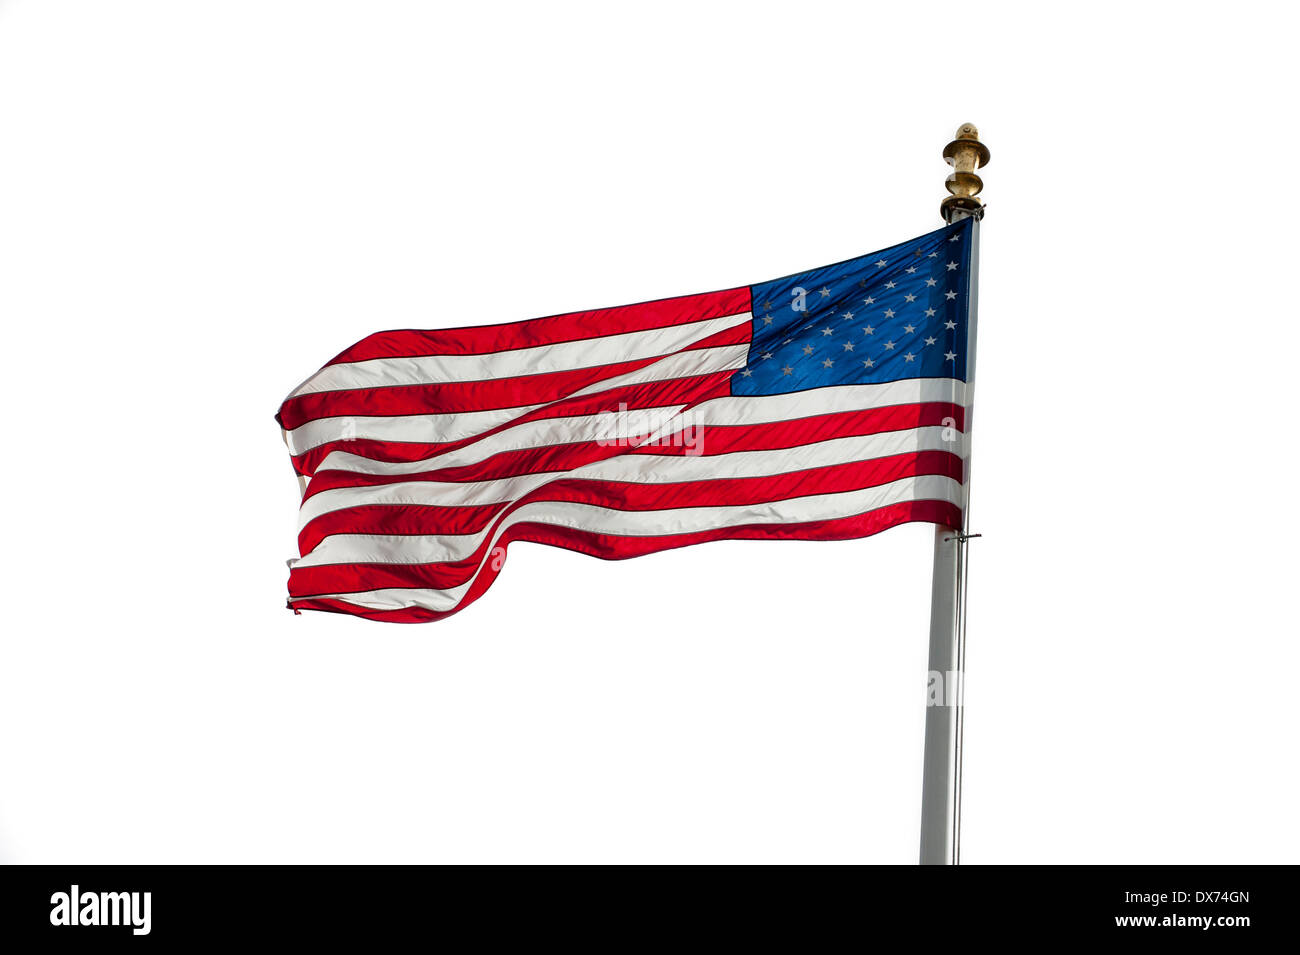 American flag showing US Stars and Stripes blowing in the wind on white background Stock Photo